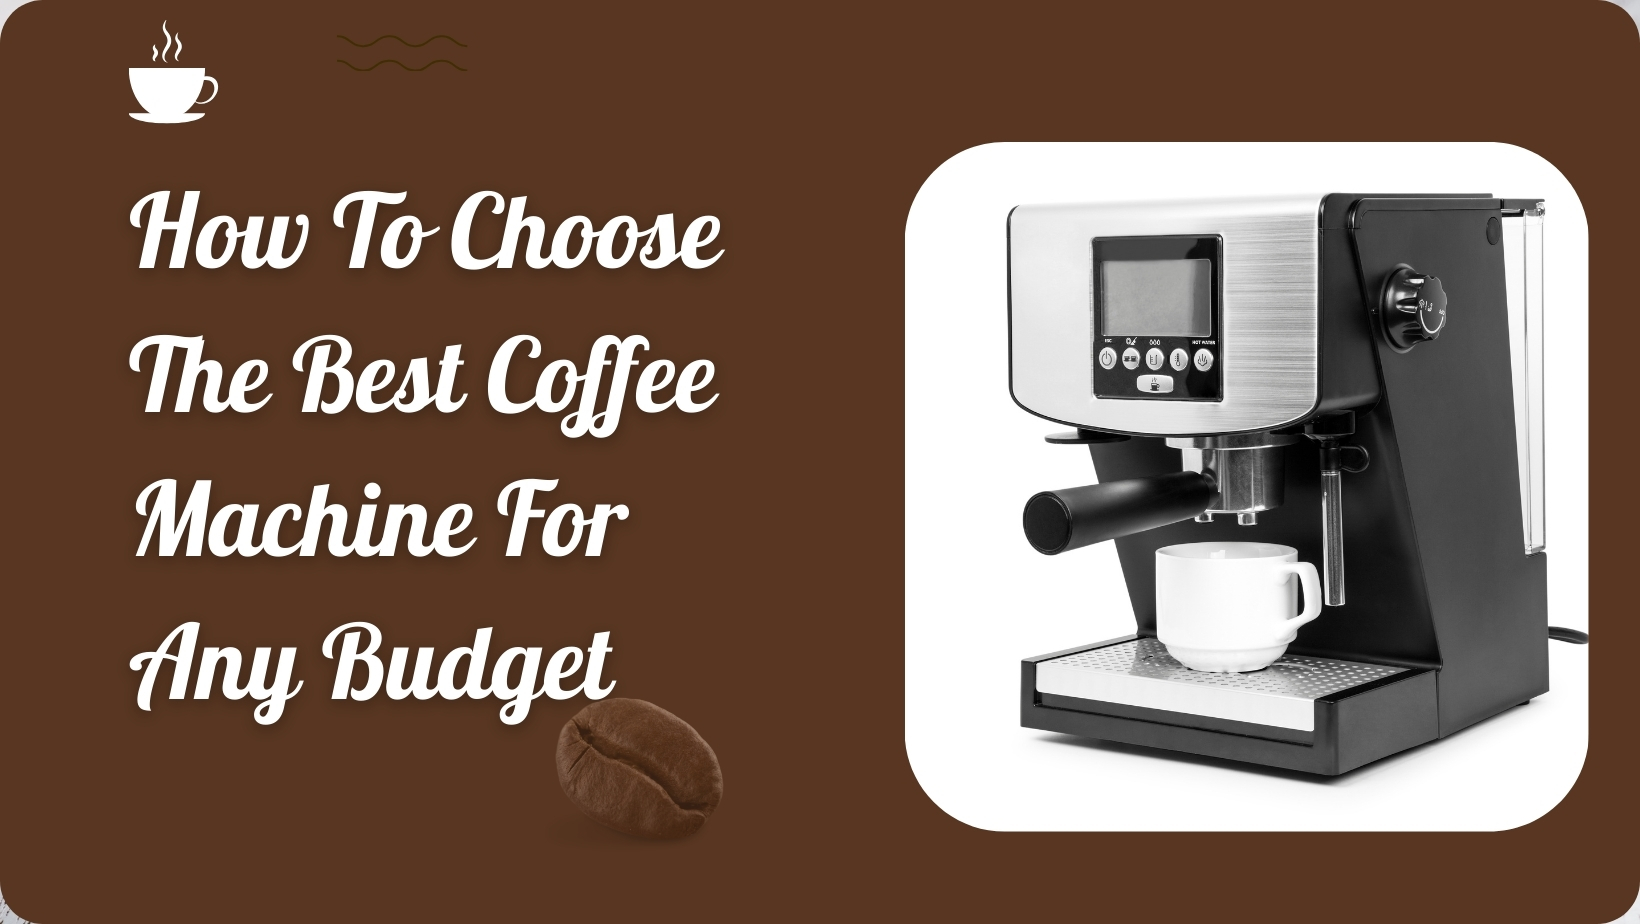 How To Choose The Best Coffee Machine For Any Budget